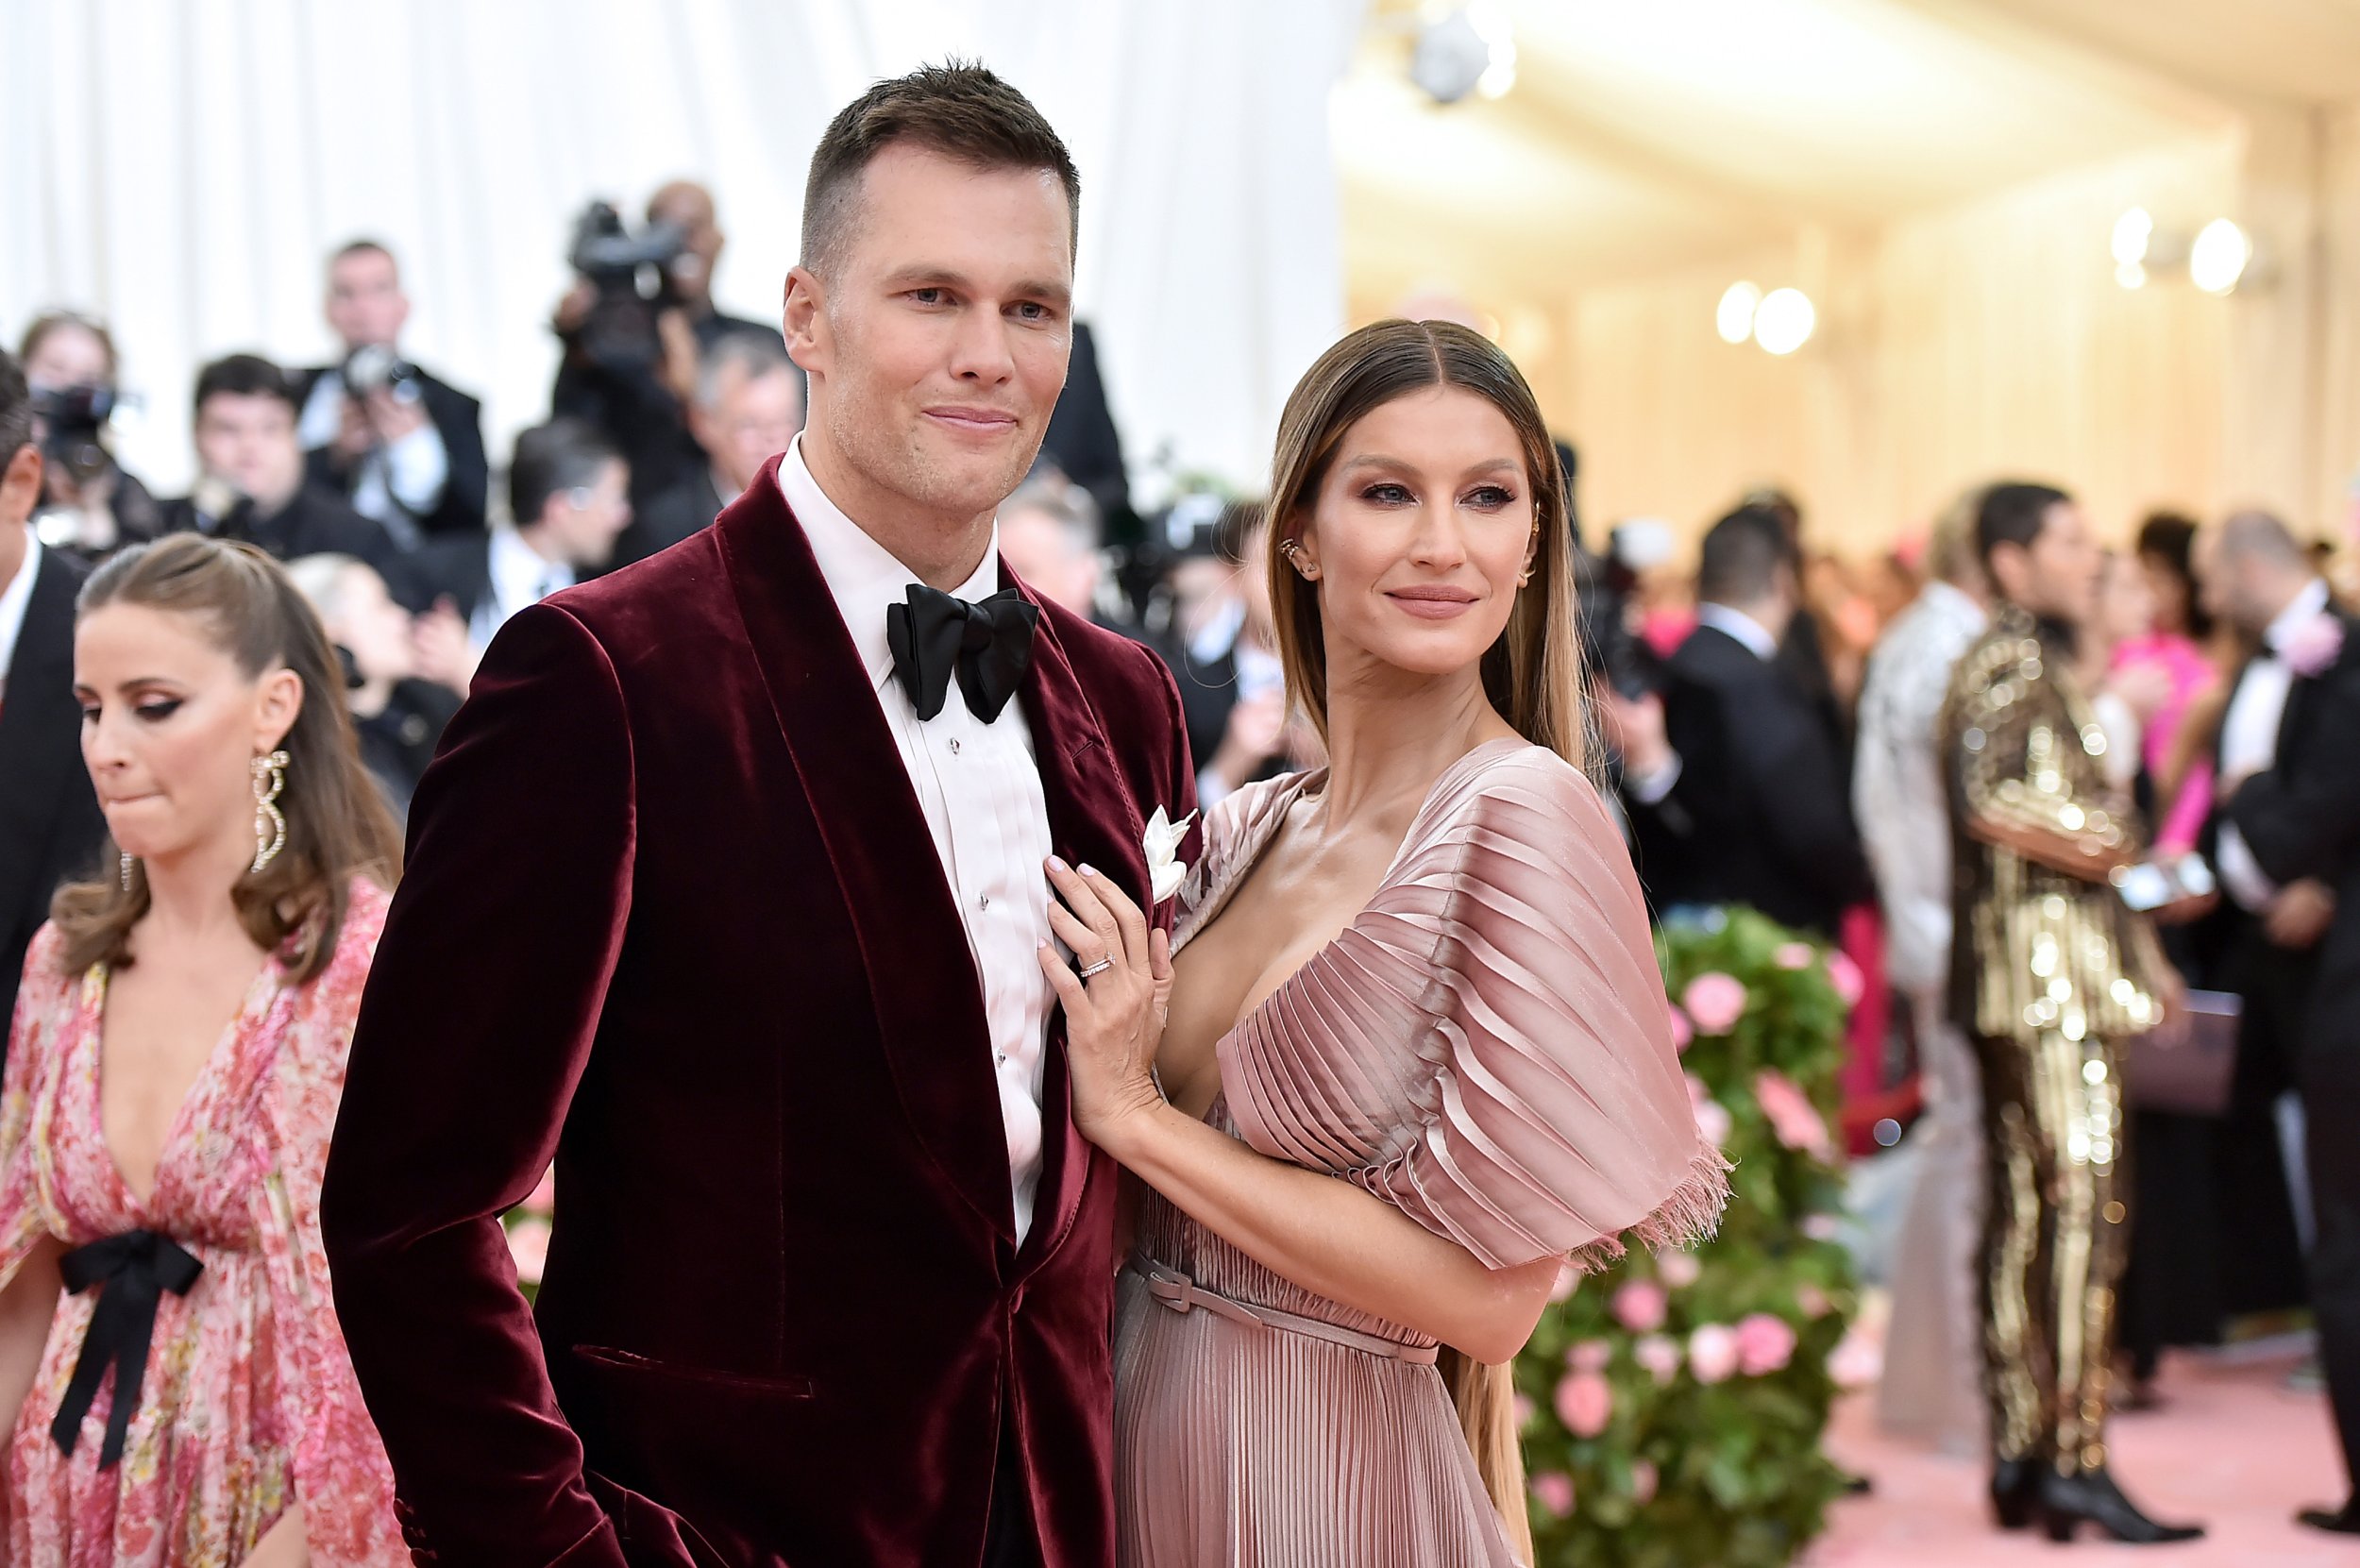 Gisele Bundchen Is 'Done' With Tom Brady Marriage, Thinks Relationship